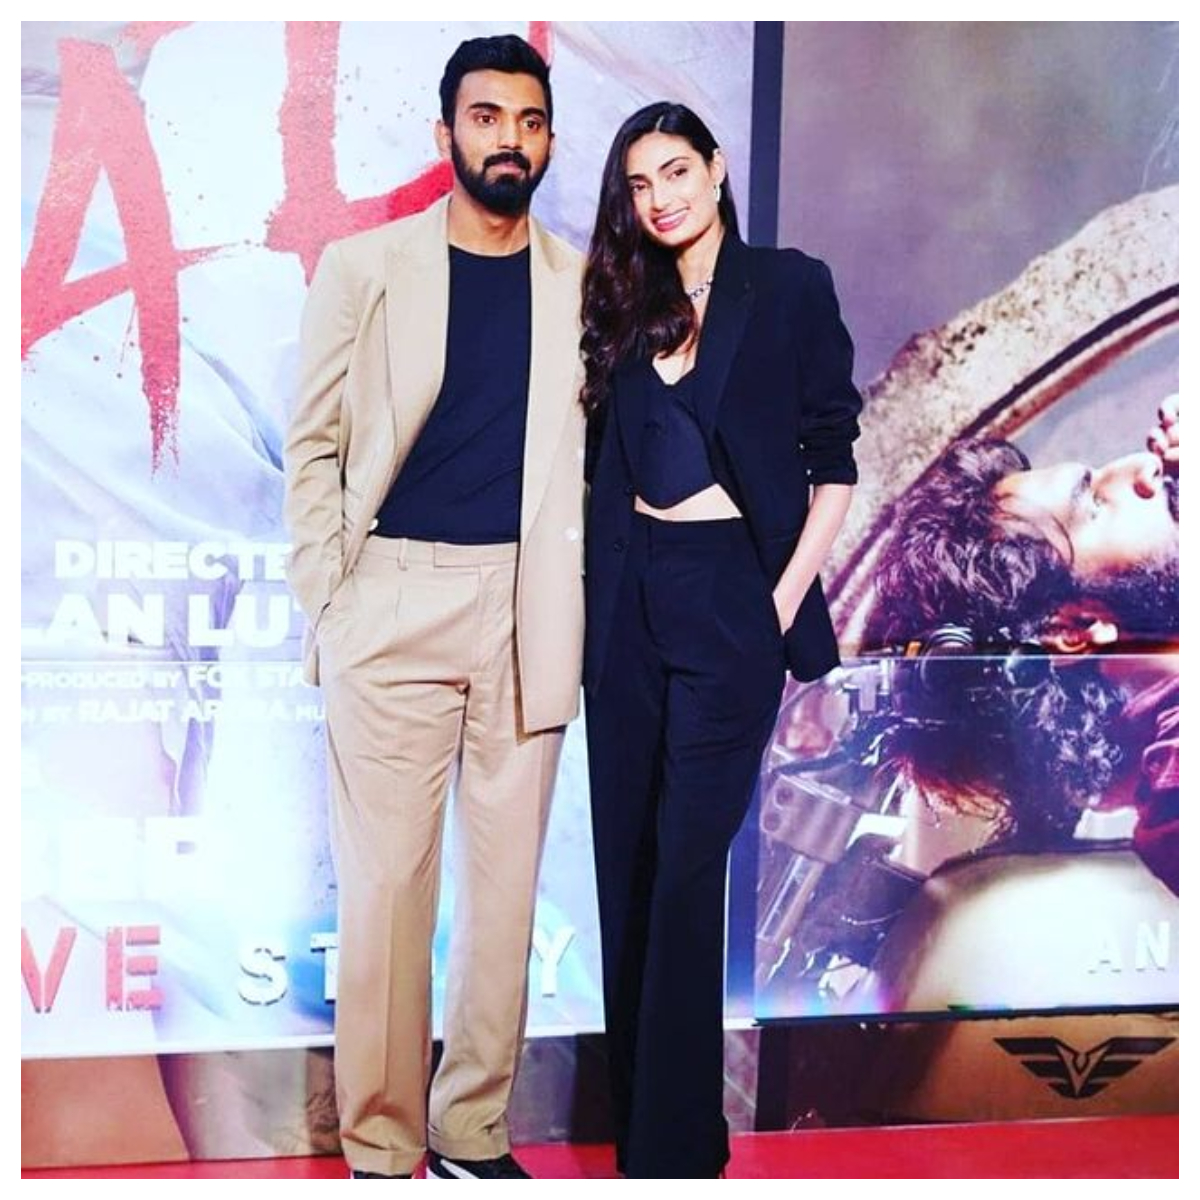 Exclusive: Athiya Shetty and KL Rahul move in together